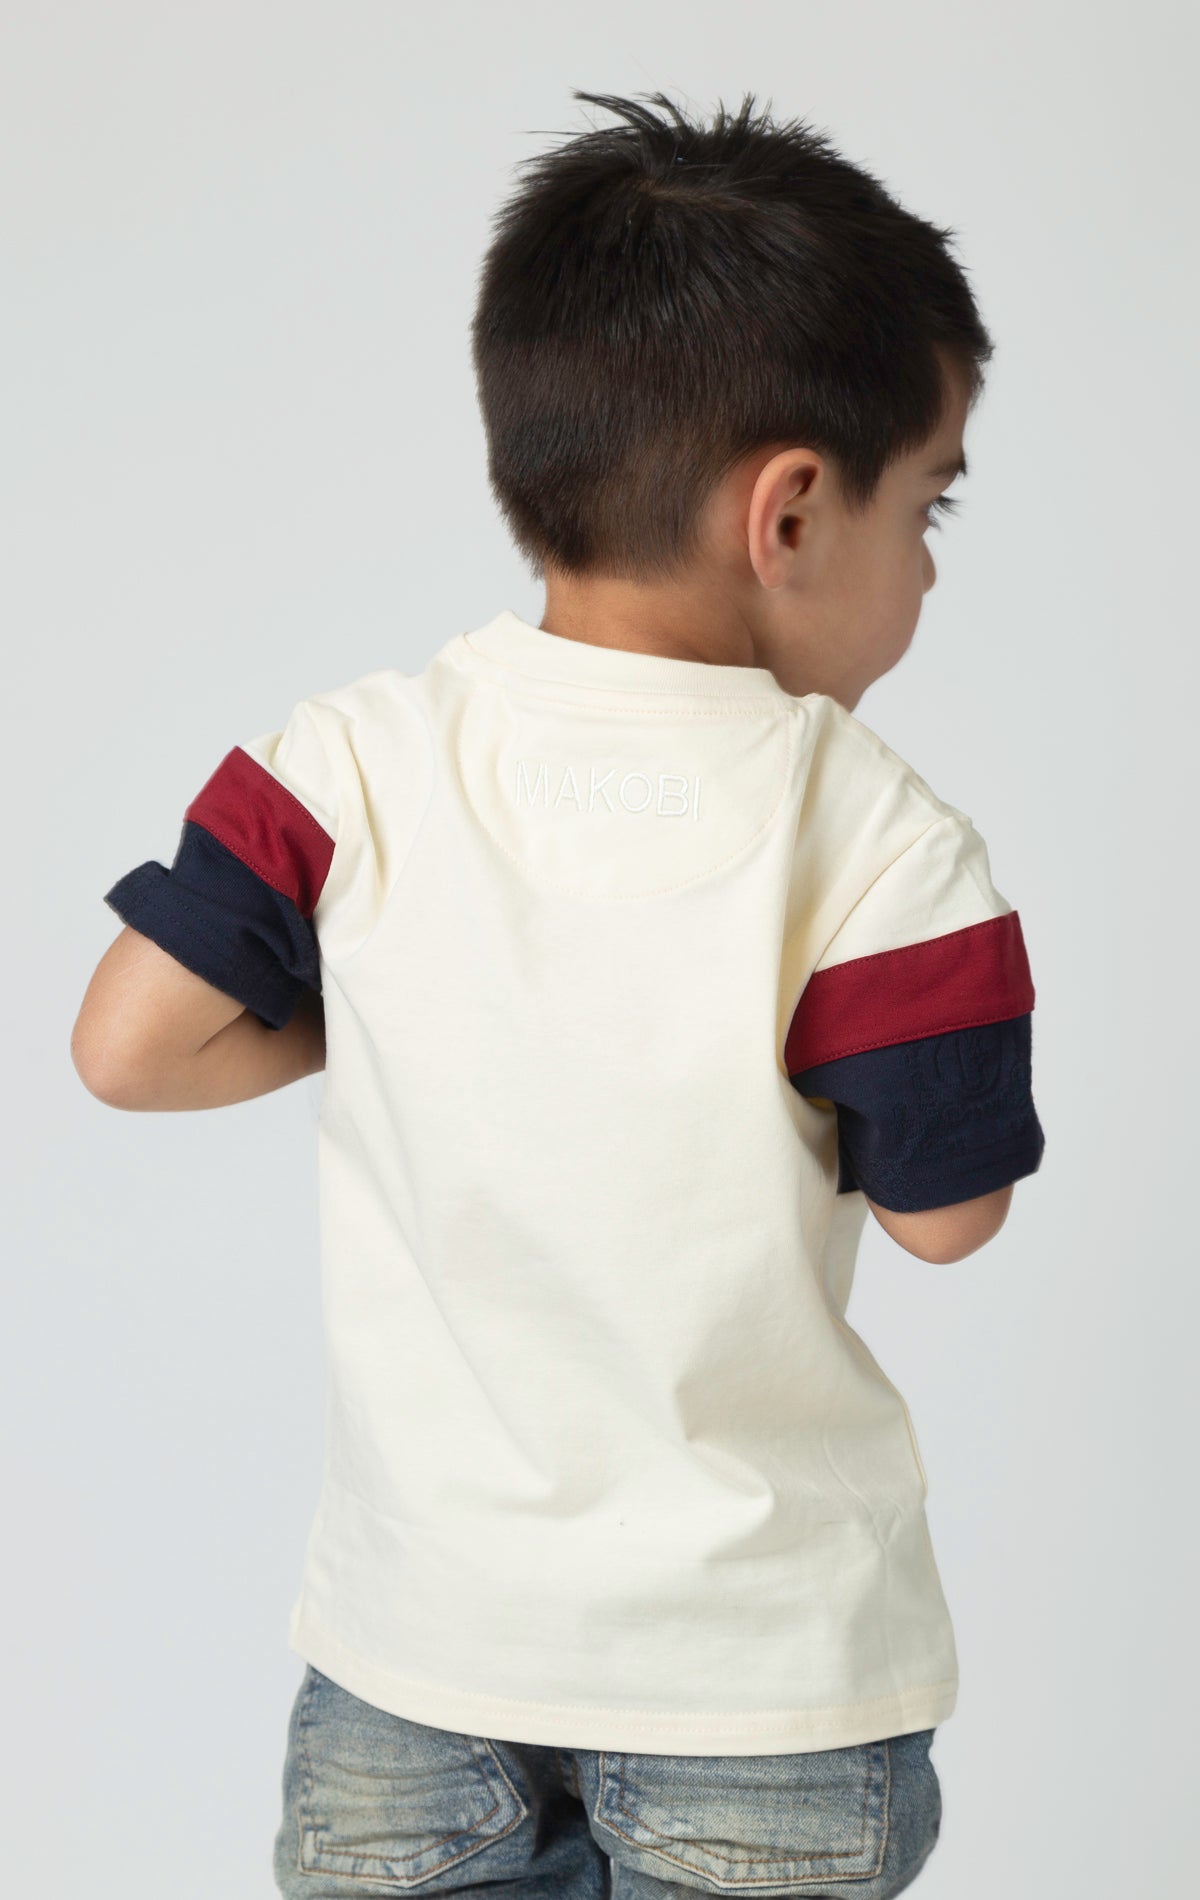 Monogram kid's t-shirt made from soft fabric back